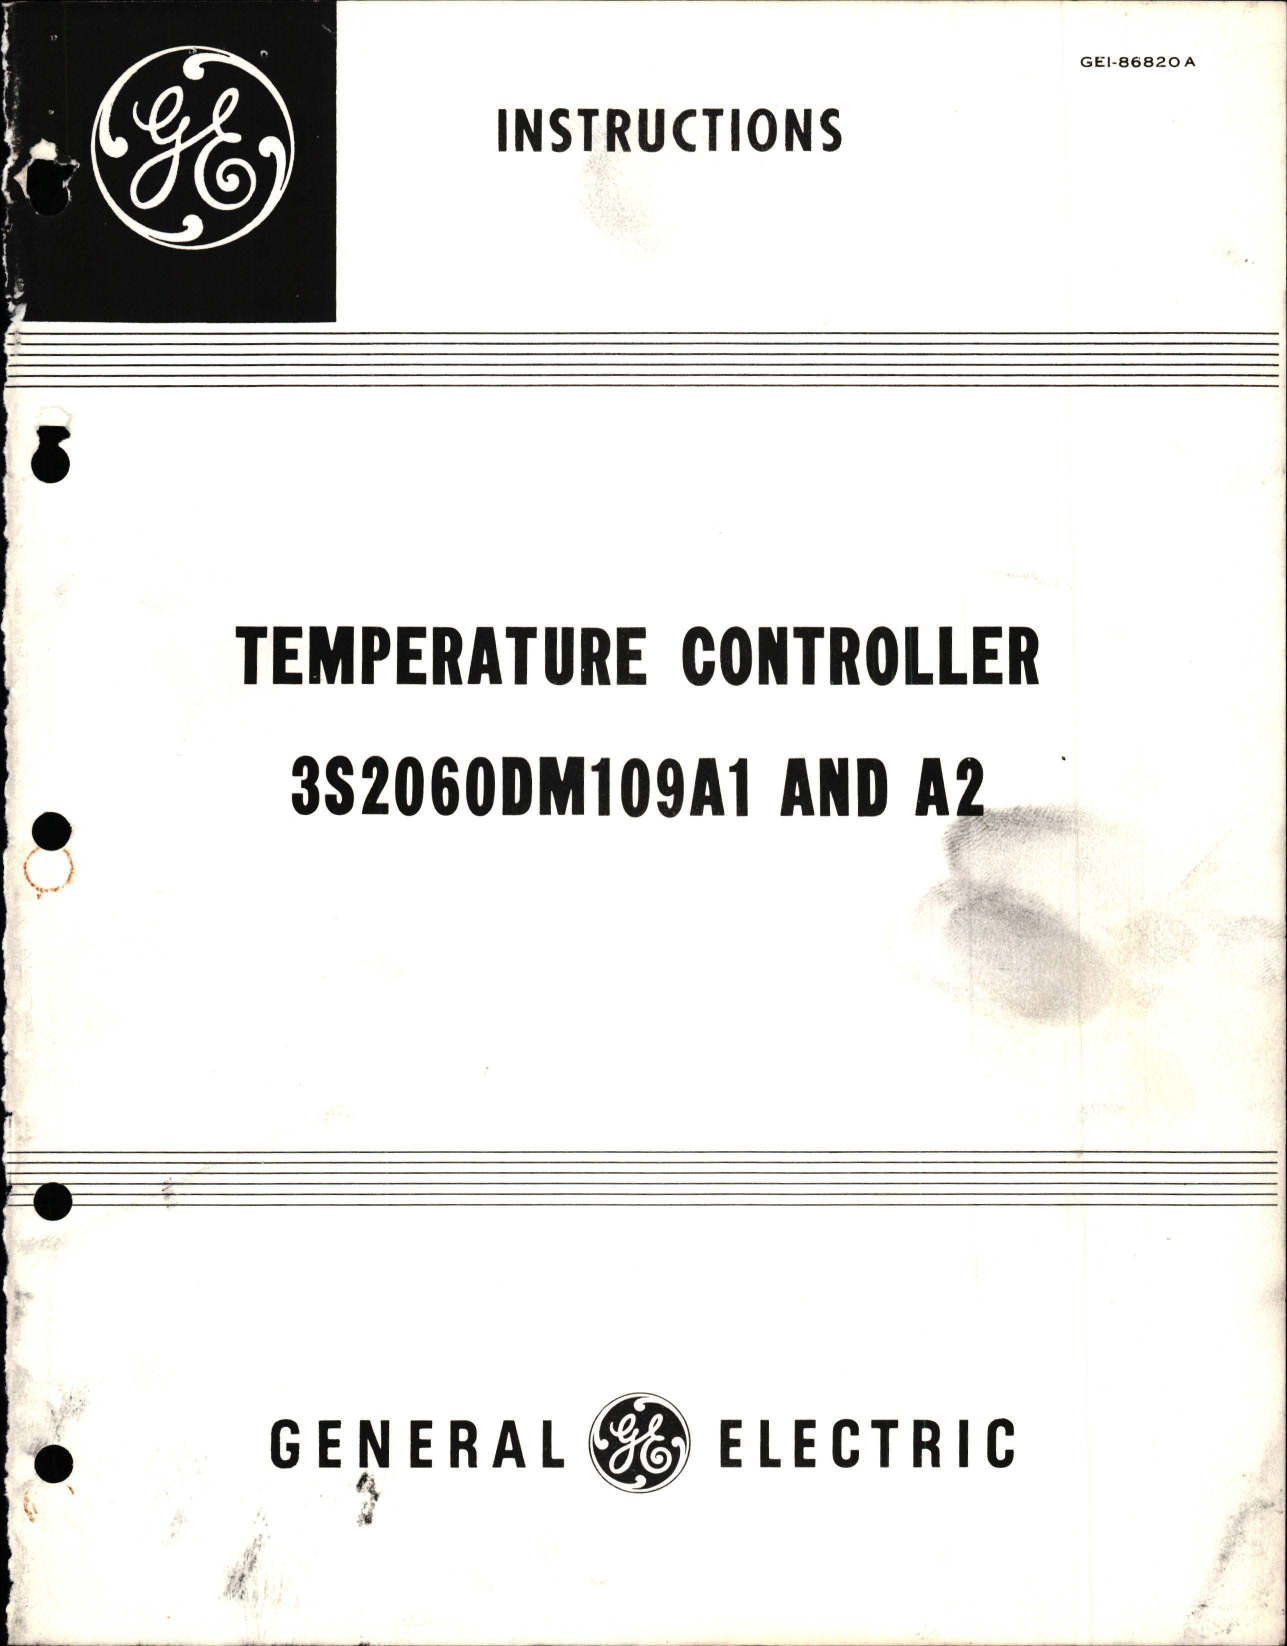 Sample page 1 from AirCorps Library document: Instructions for Temperature Controller - 3S2060DM109A1 and A2 